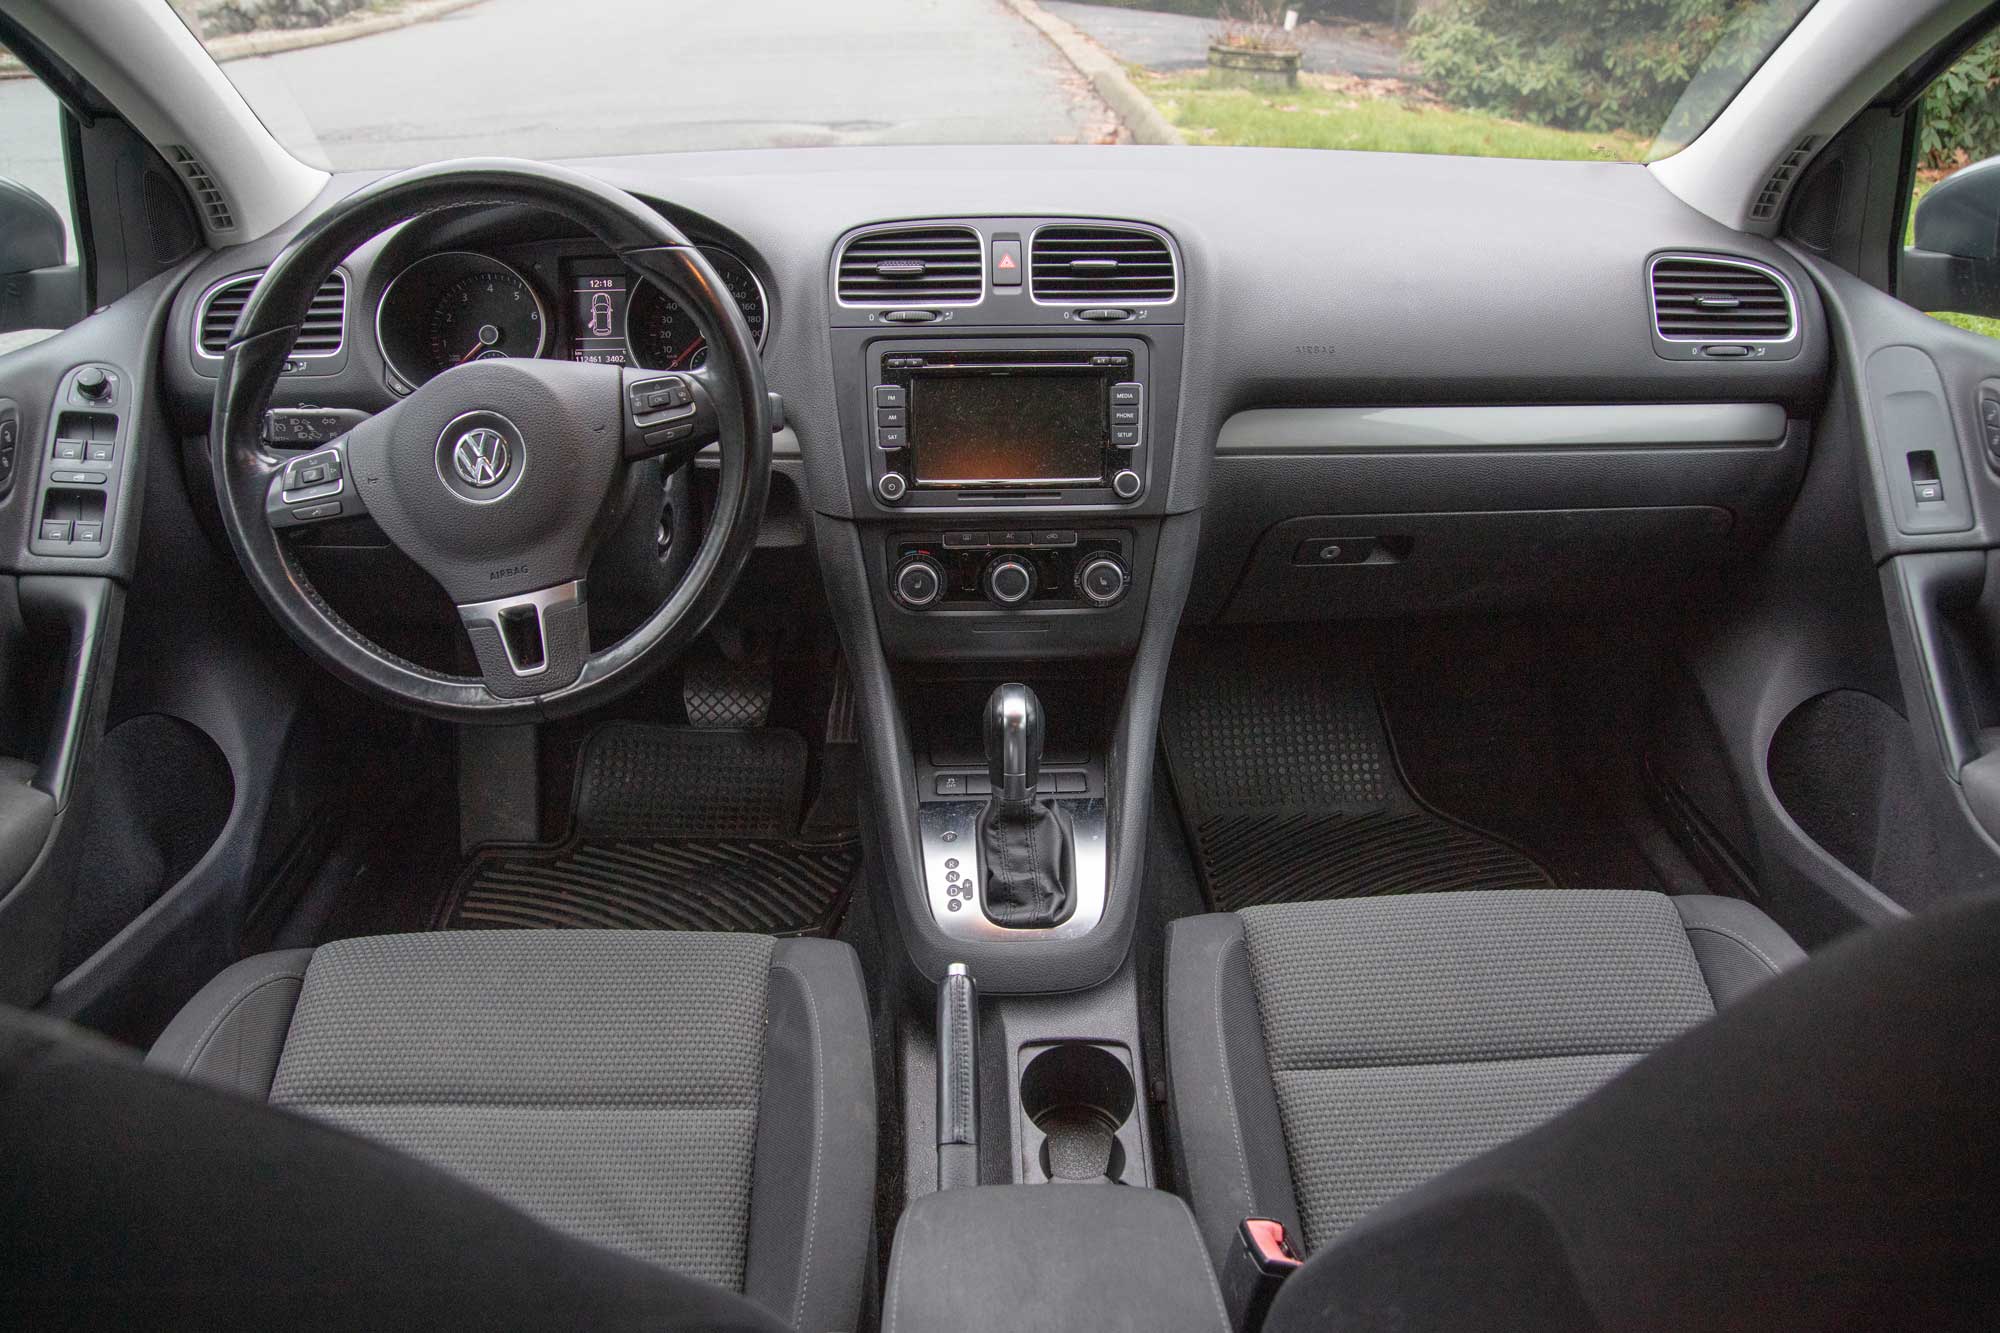 The overall view inside the vehicle, including the dash.